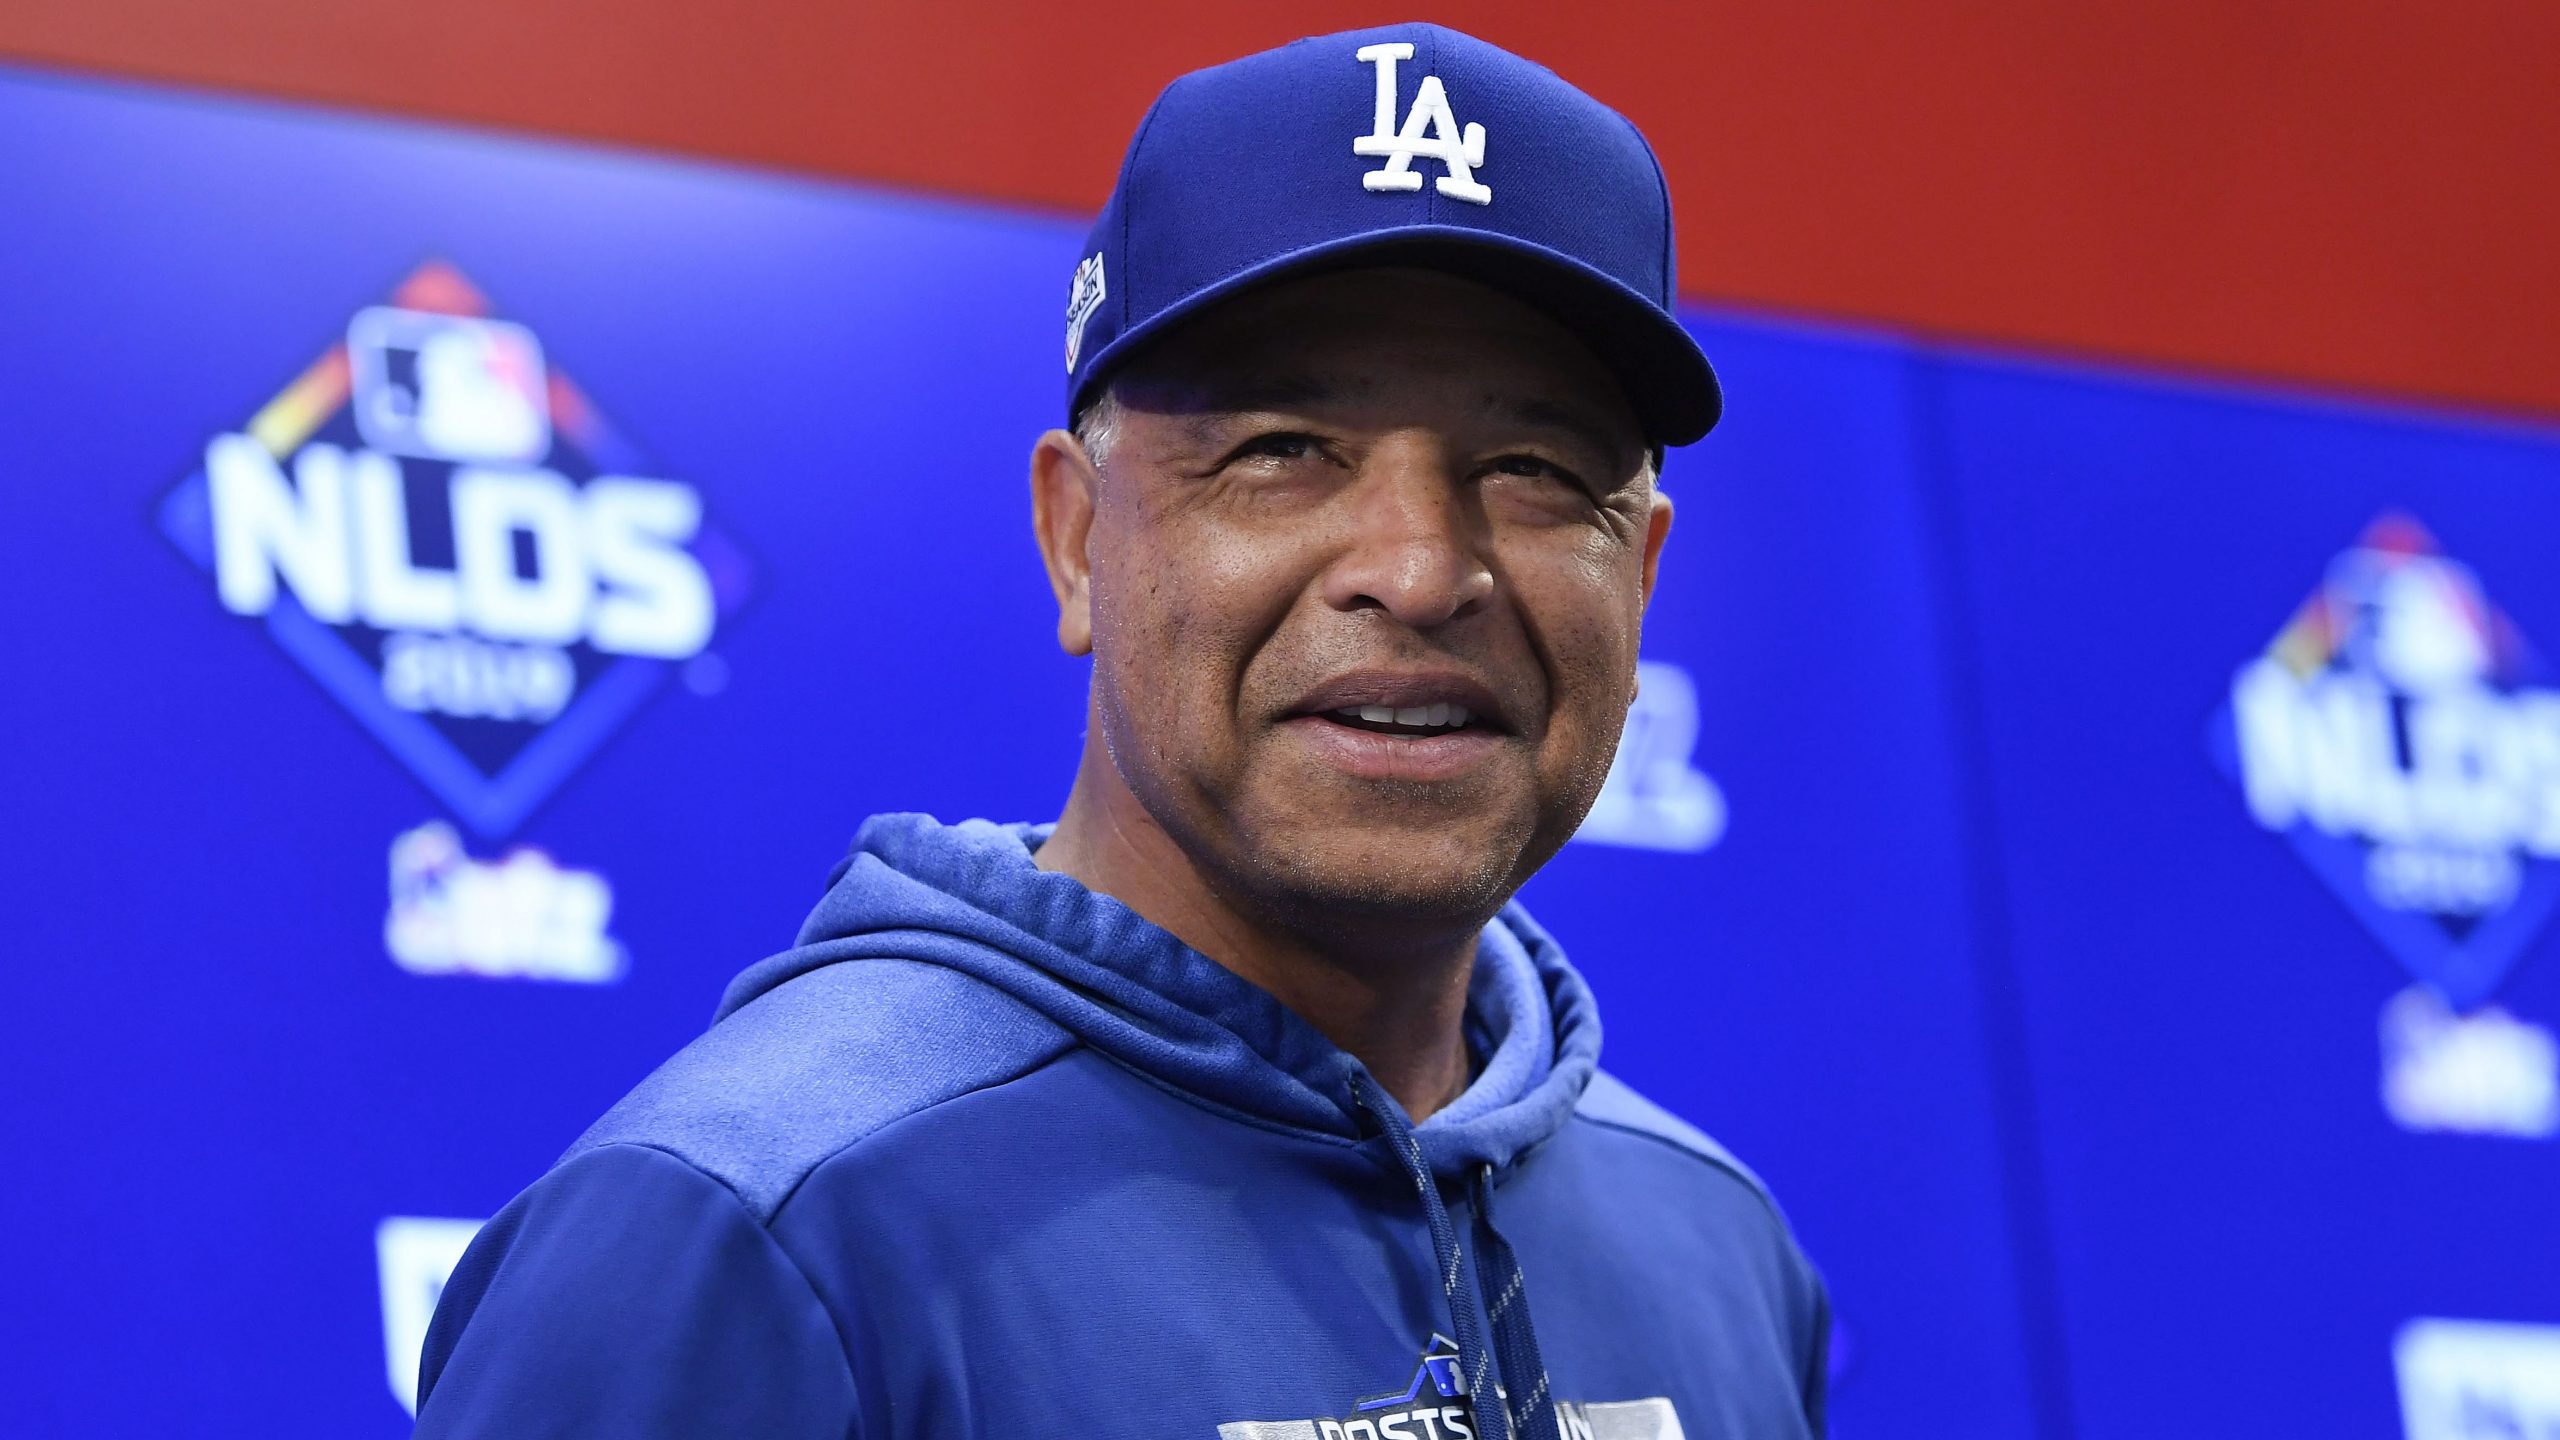 Report: Dodgers manager Dave Roberts will return next season